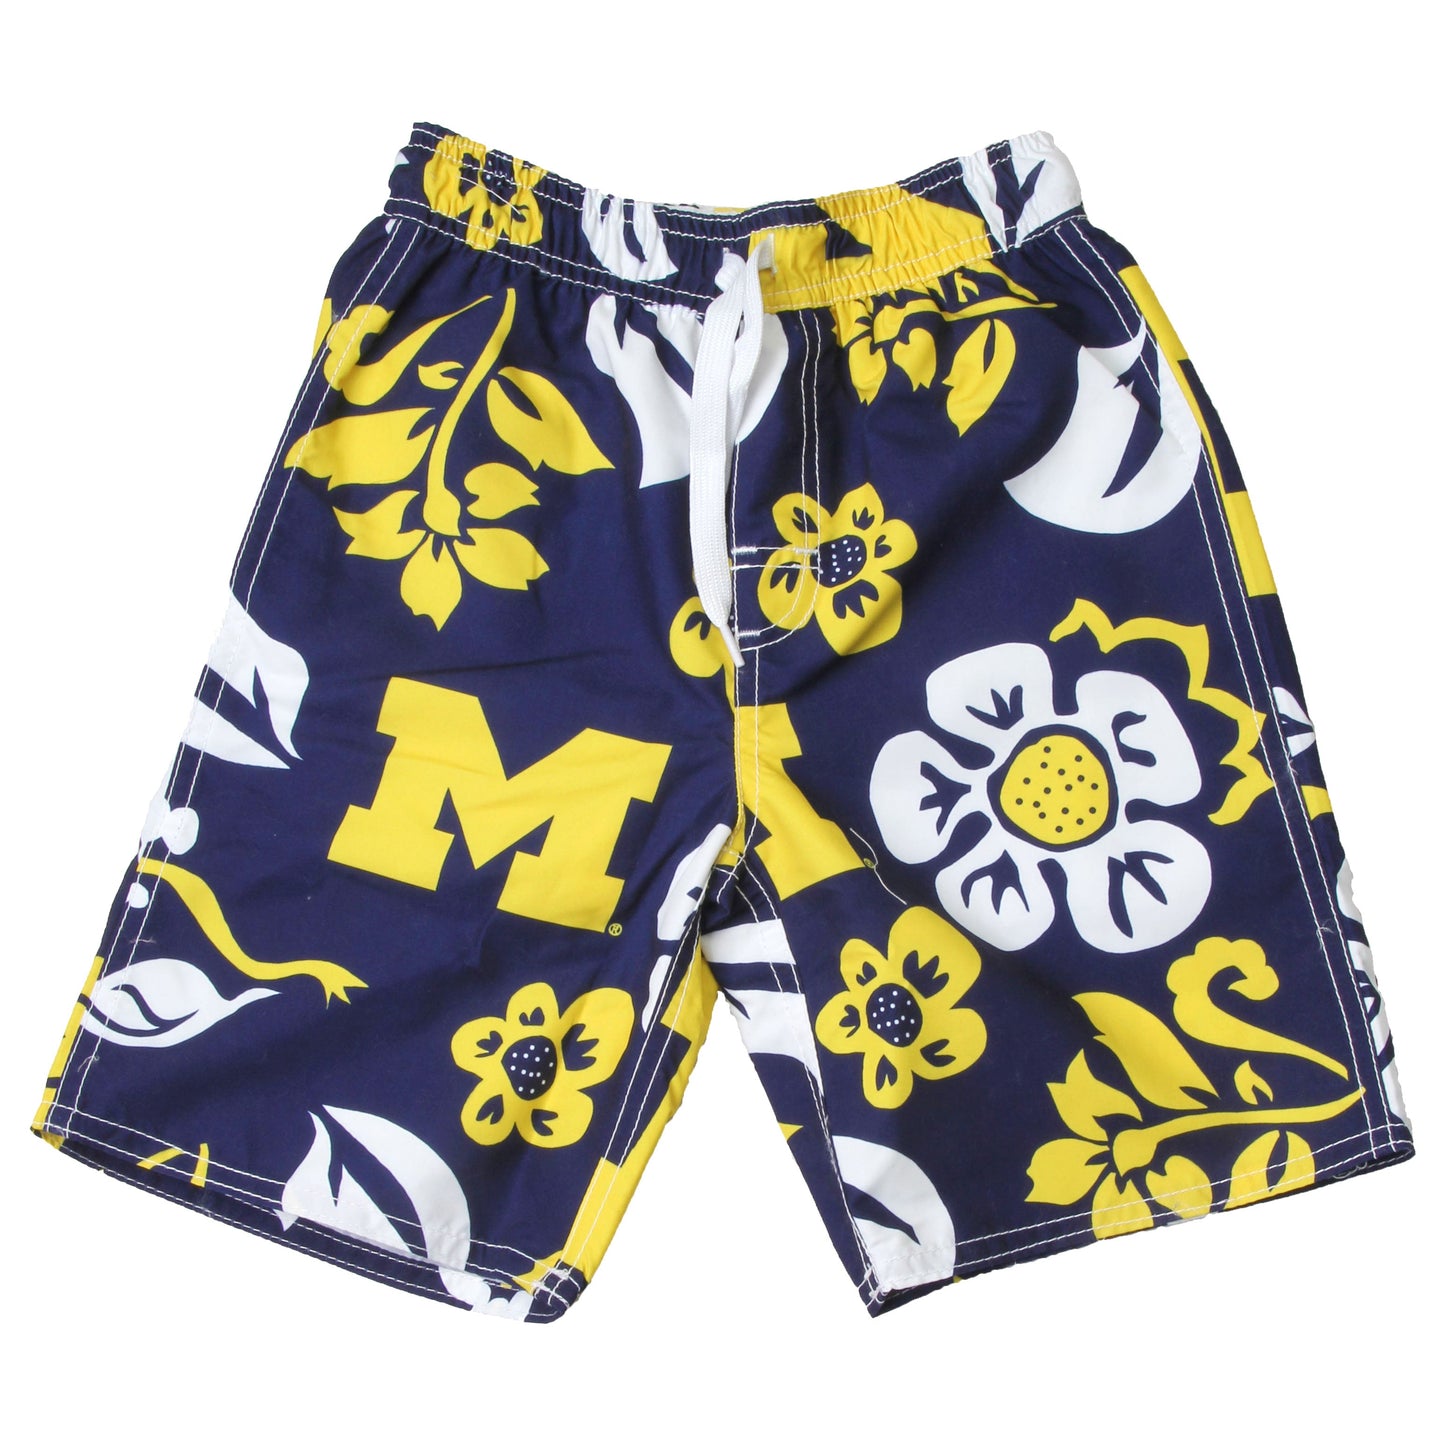 Michigan Wolverines Youth Boys Floral Trunks